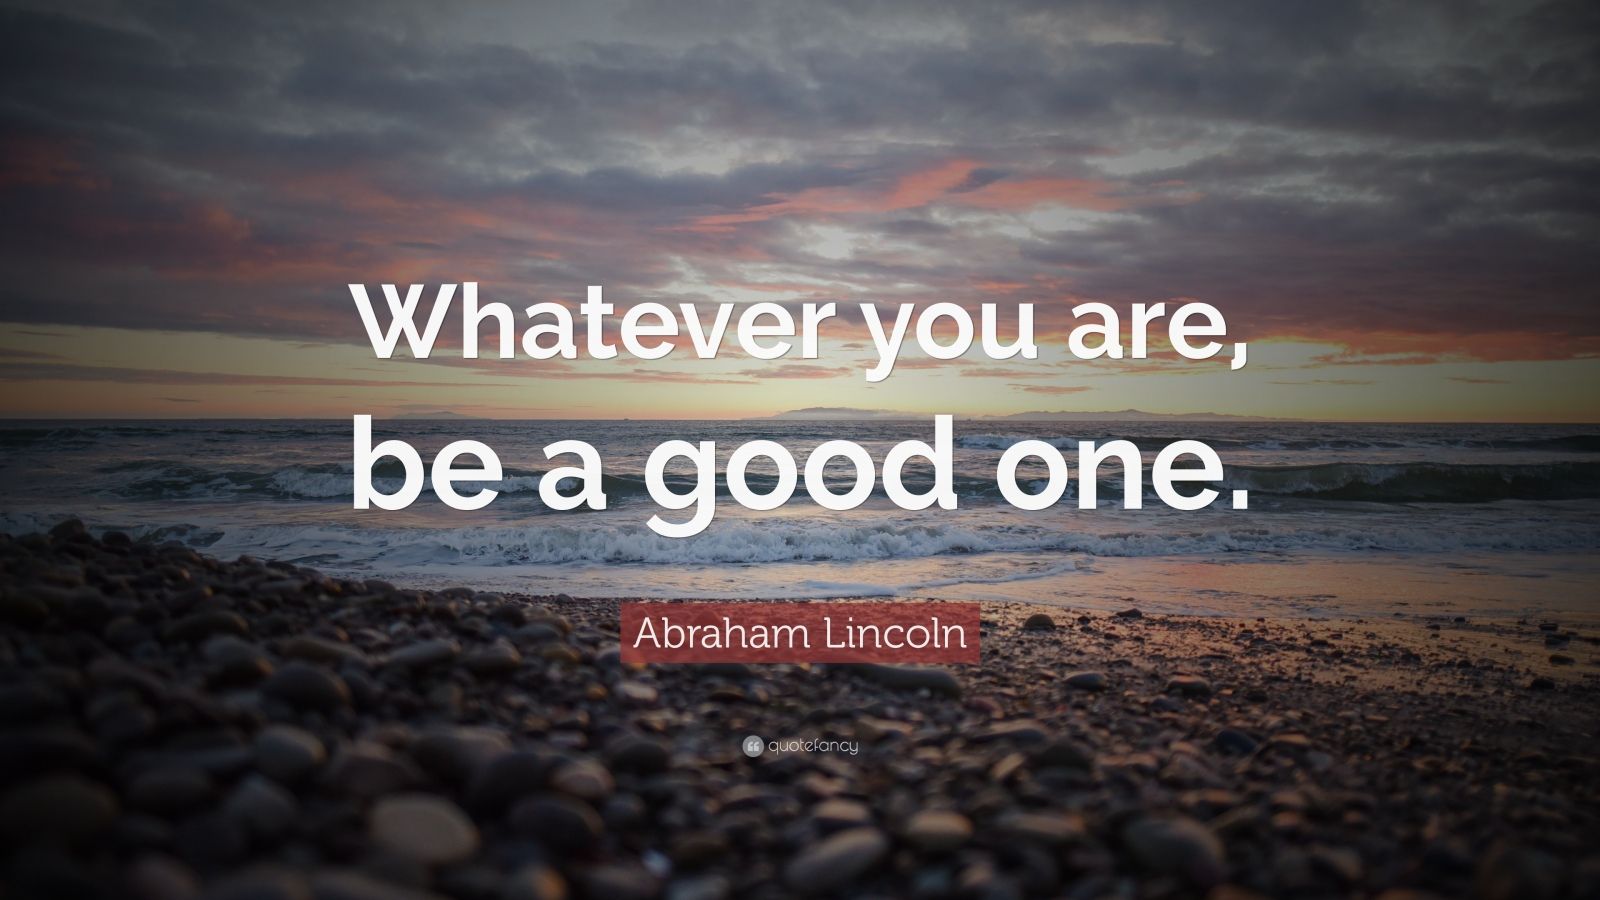 Abraham Lincoln Quote: “Whatever you are, be a good one.” (23